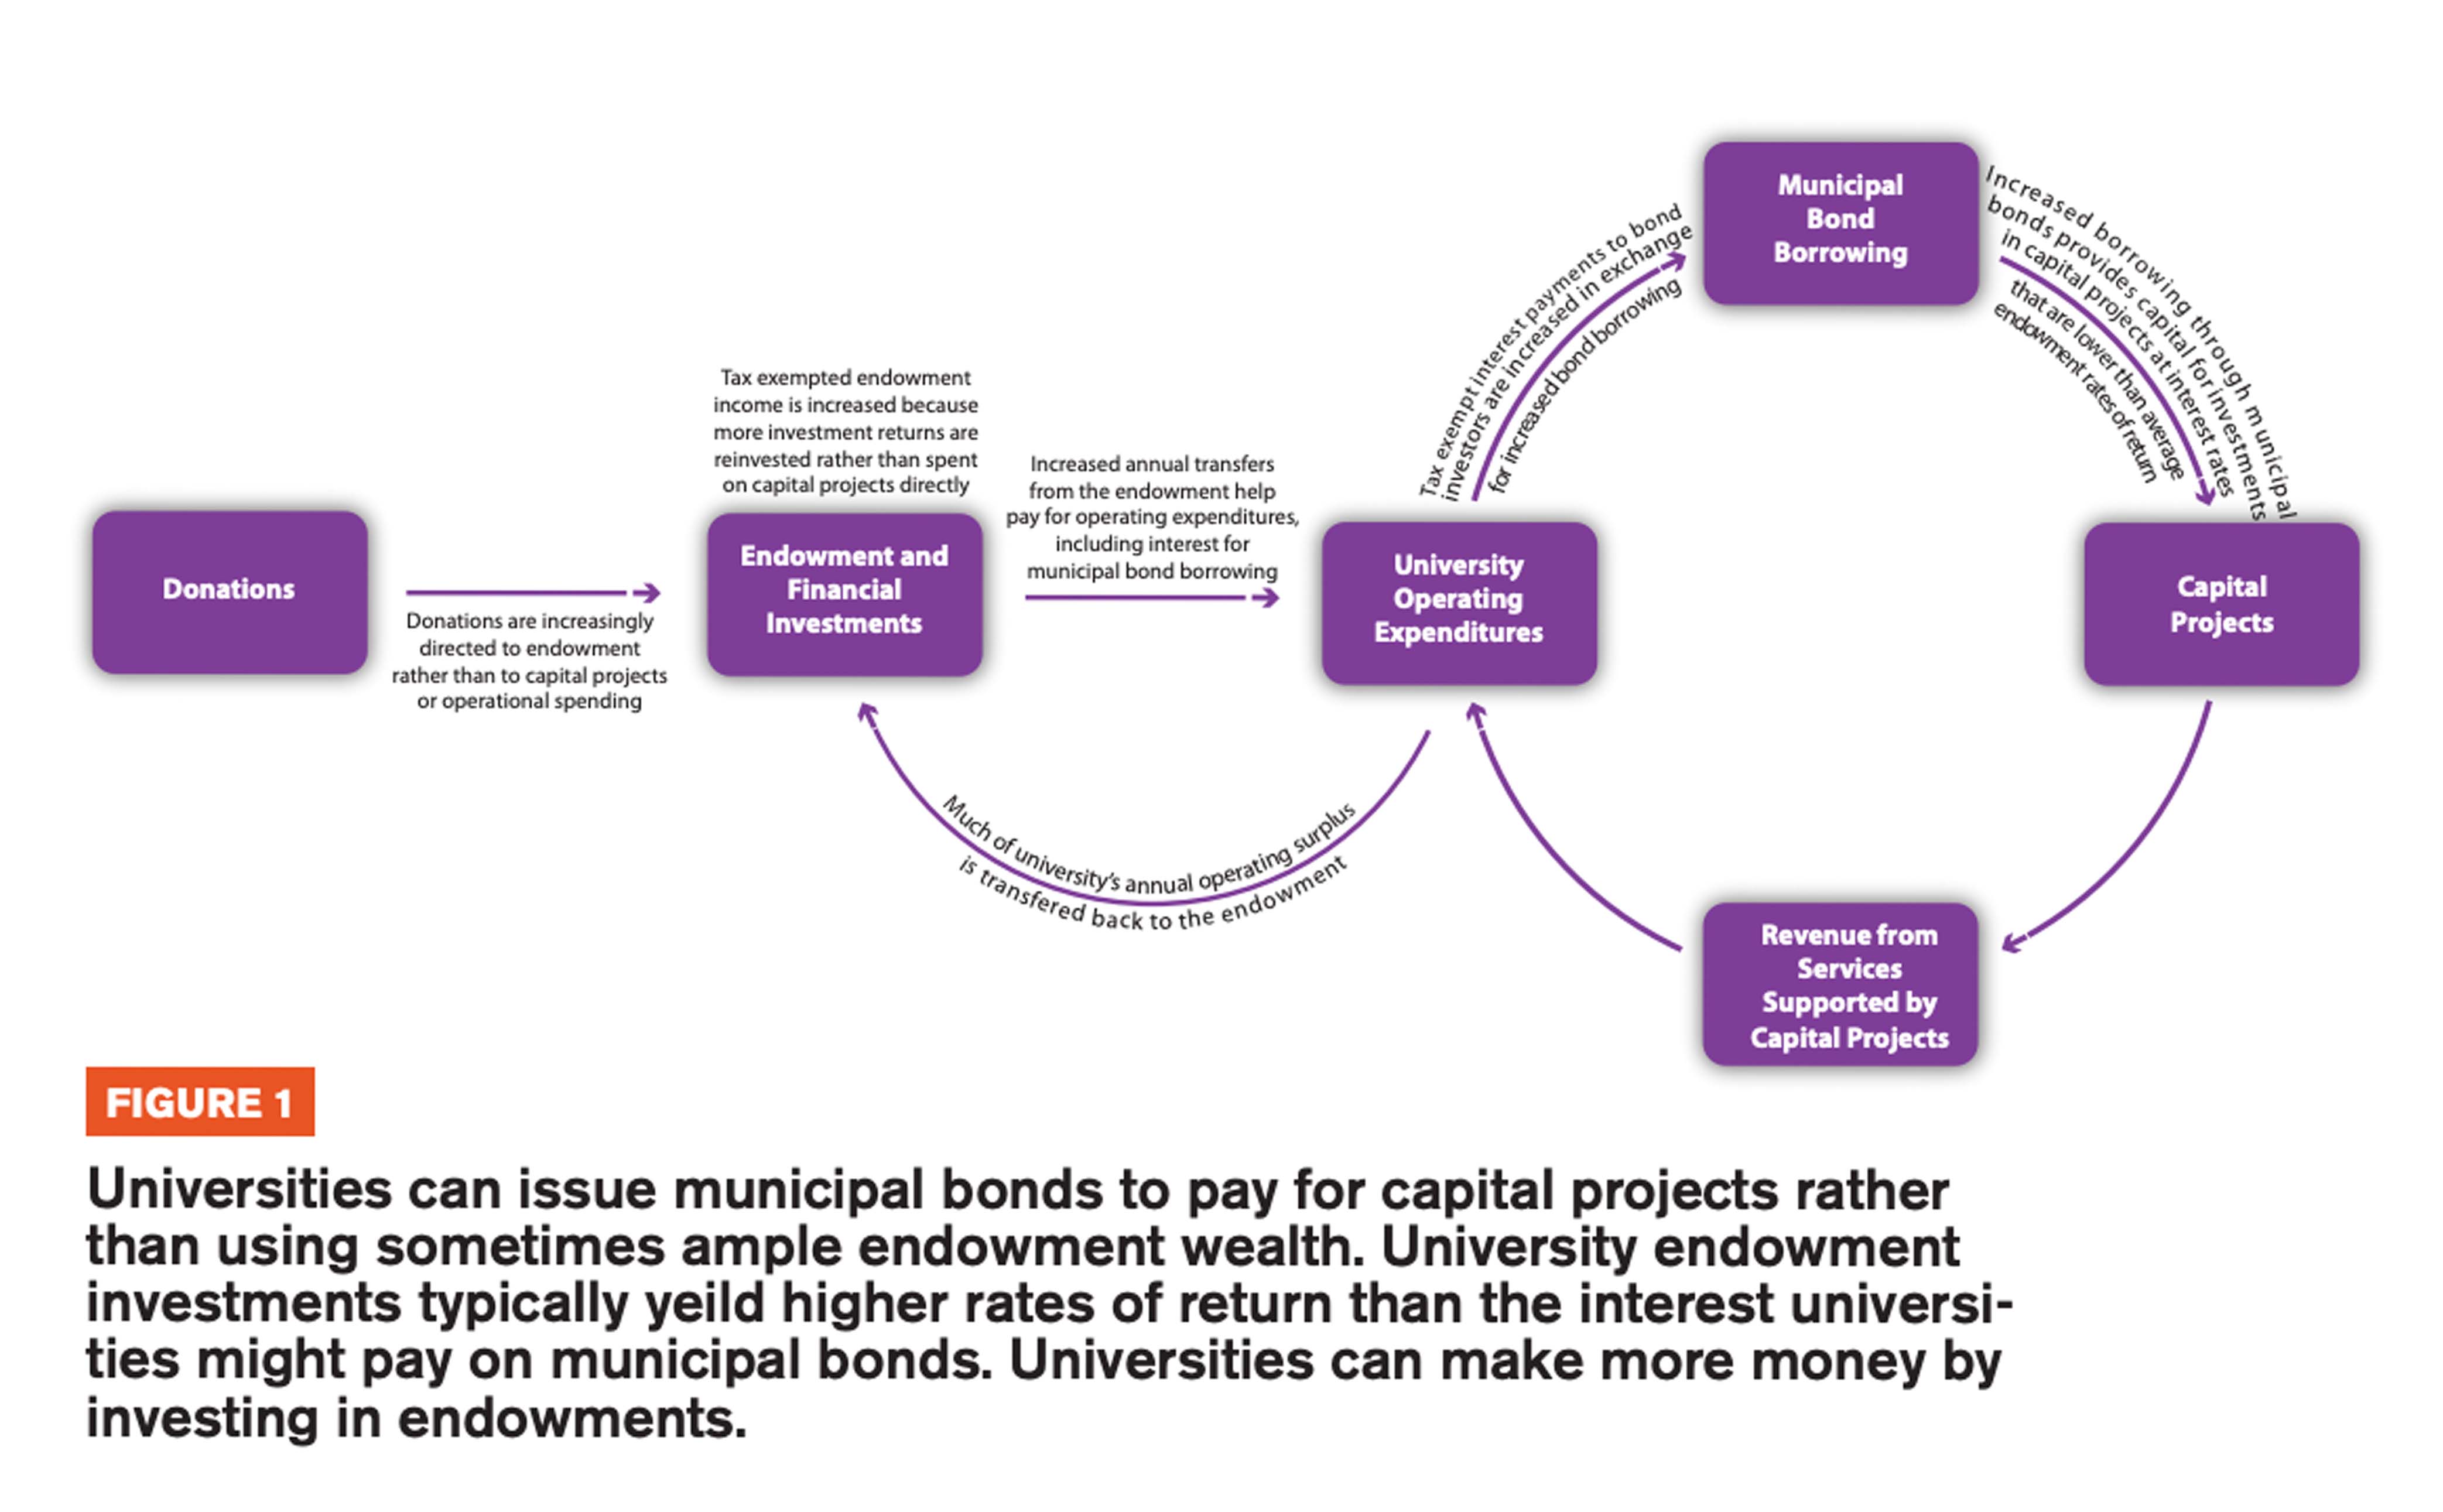 Figure 1 includes an infographic showcasing how universities can have municipal bonds to pay for capital projects rather than using sometimes ample endowment wealth